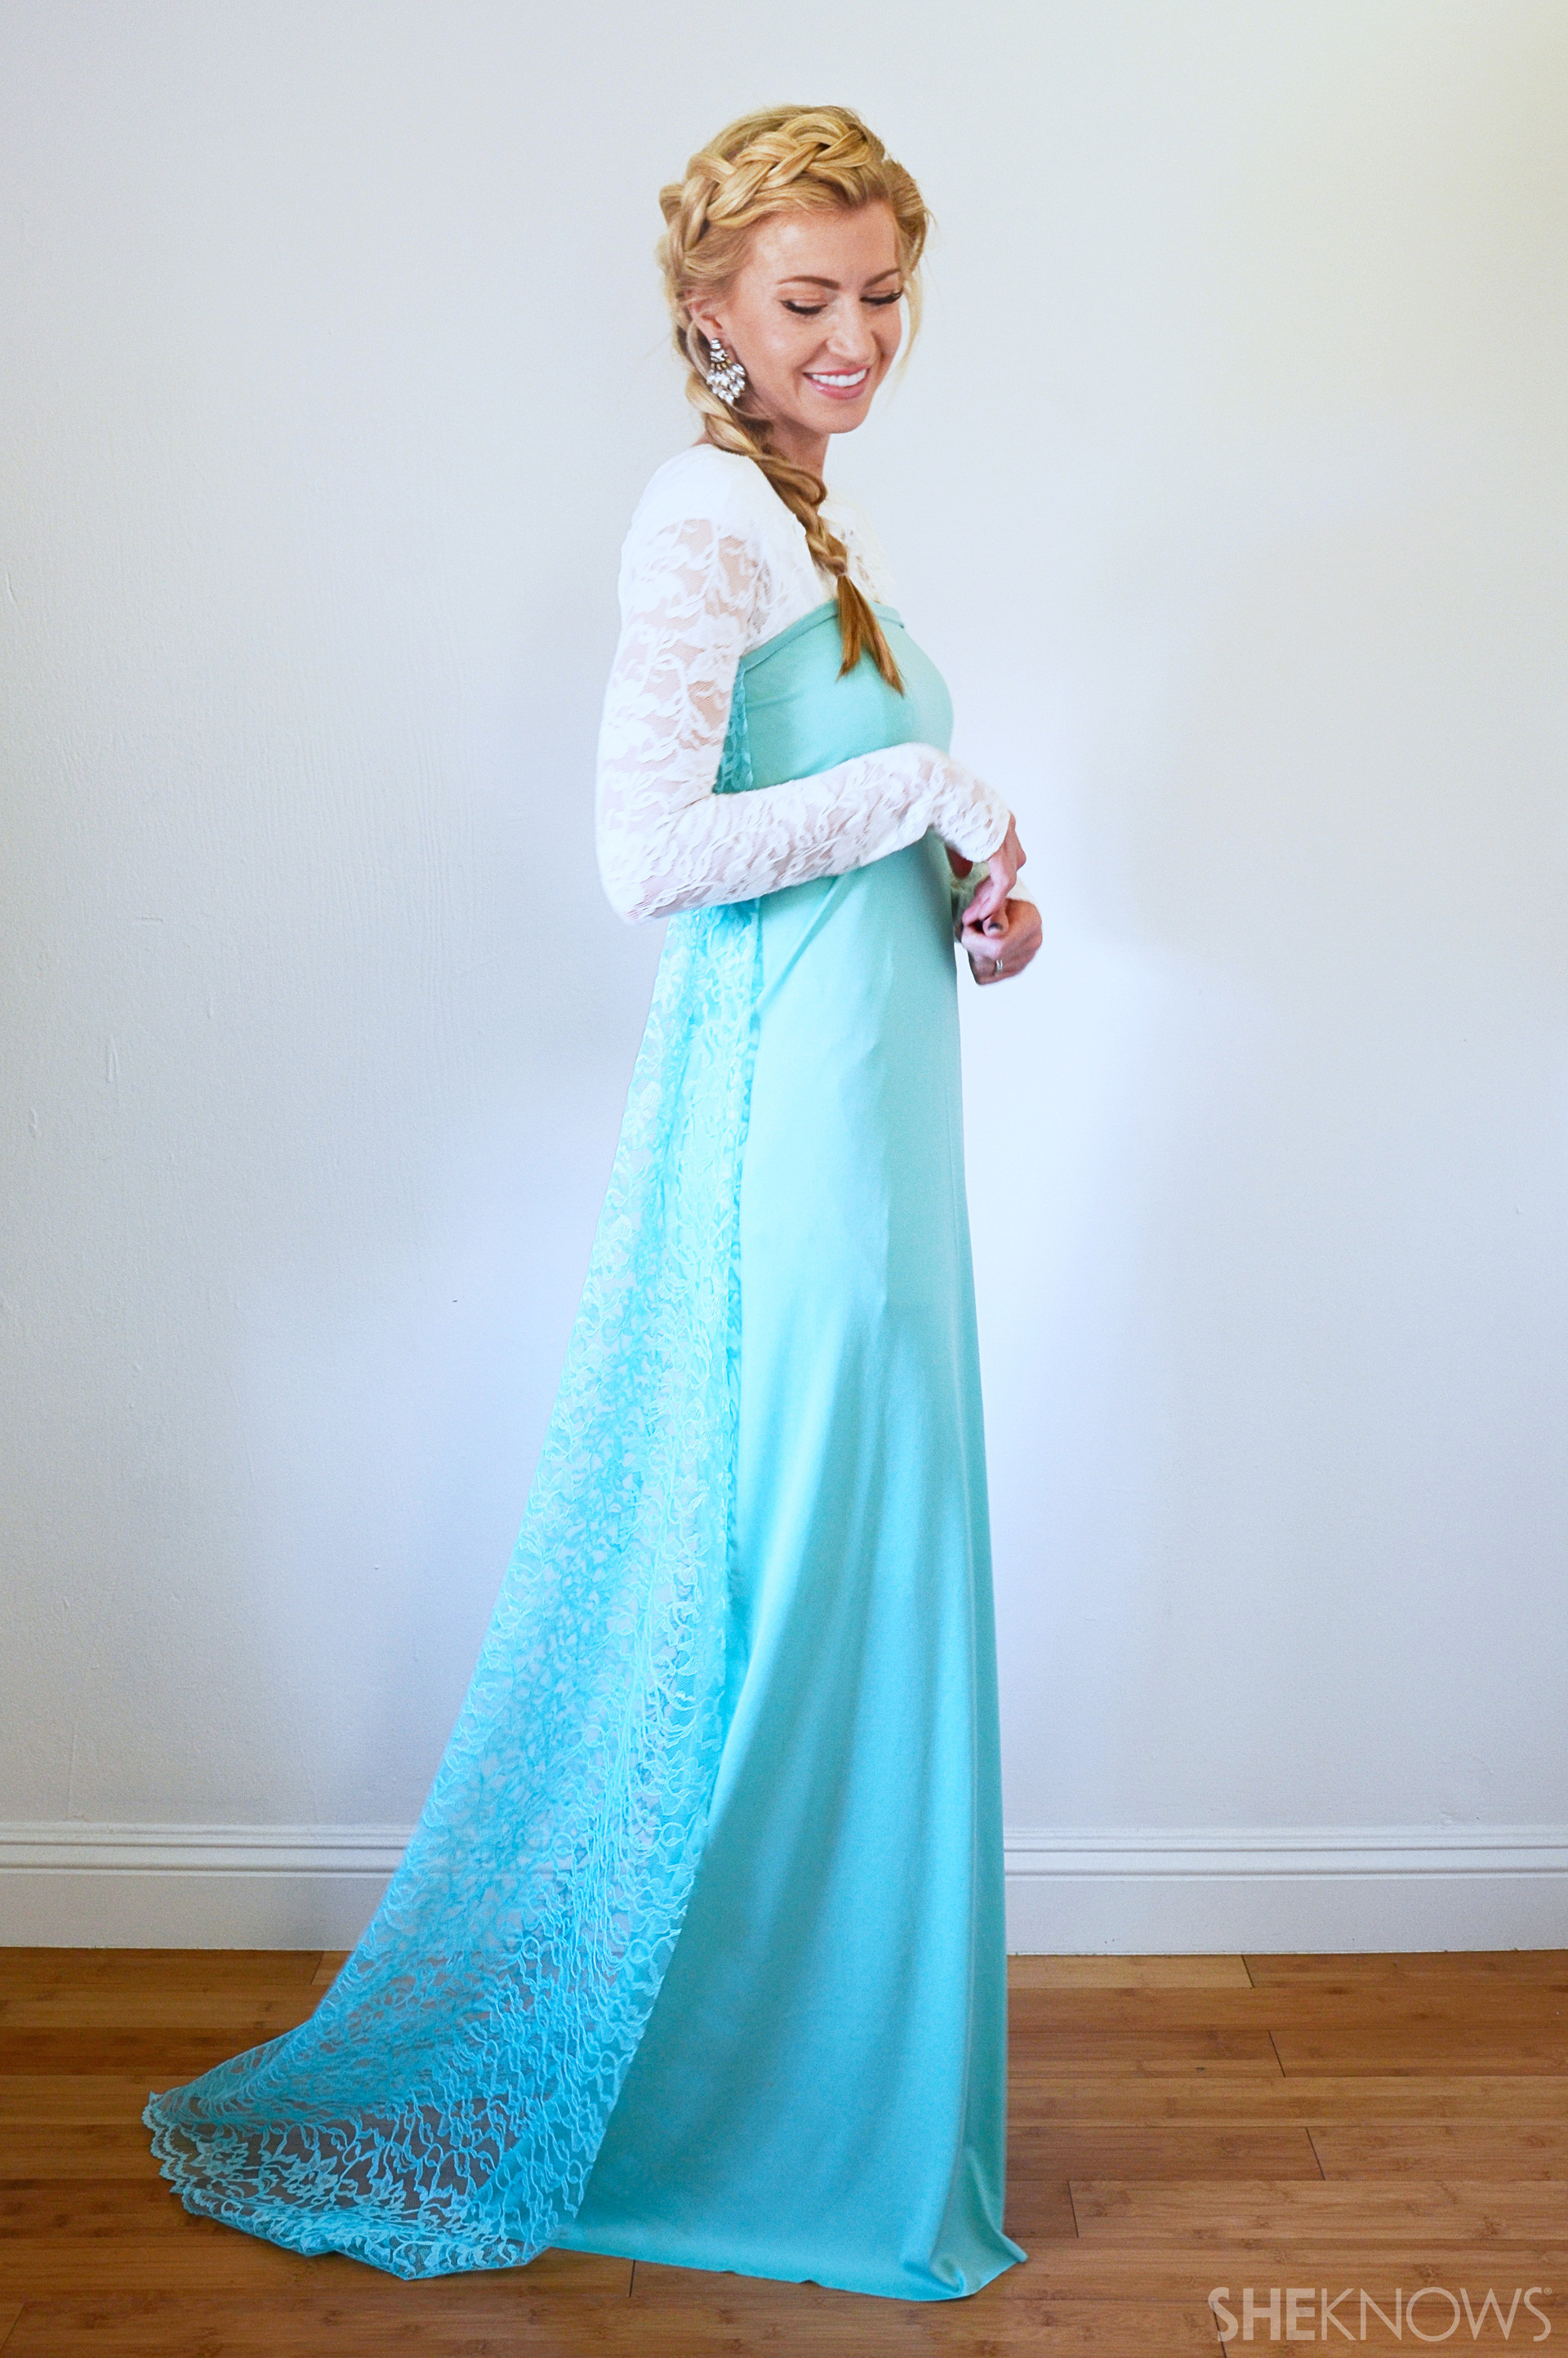 DIY Disney Costumes For Adults
 3 Easy DIY Disney Princess Costumes — Because You re